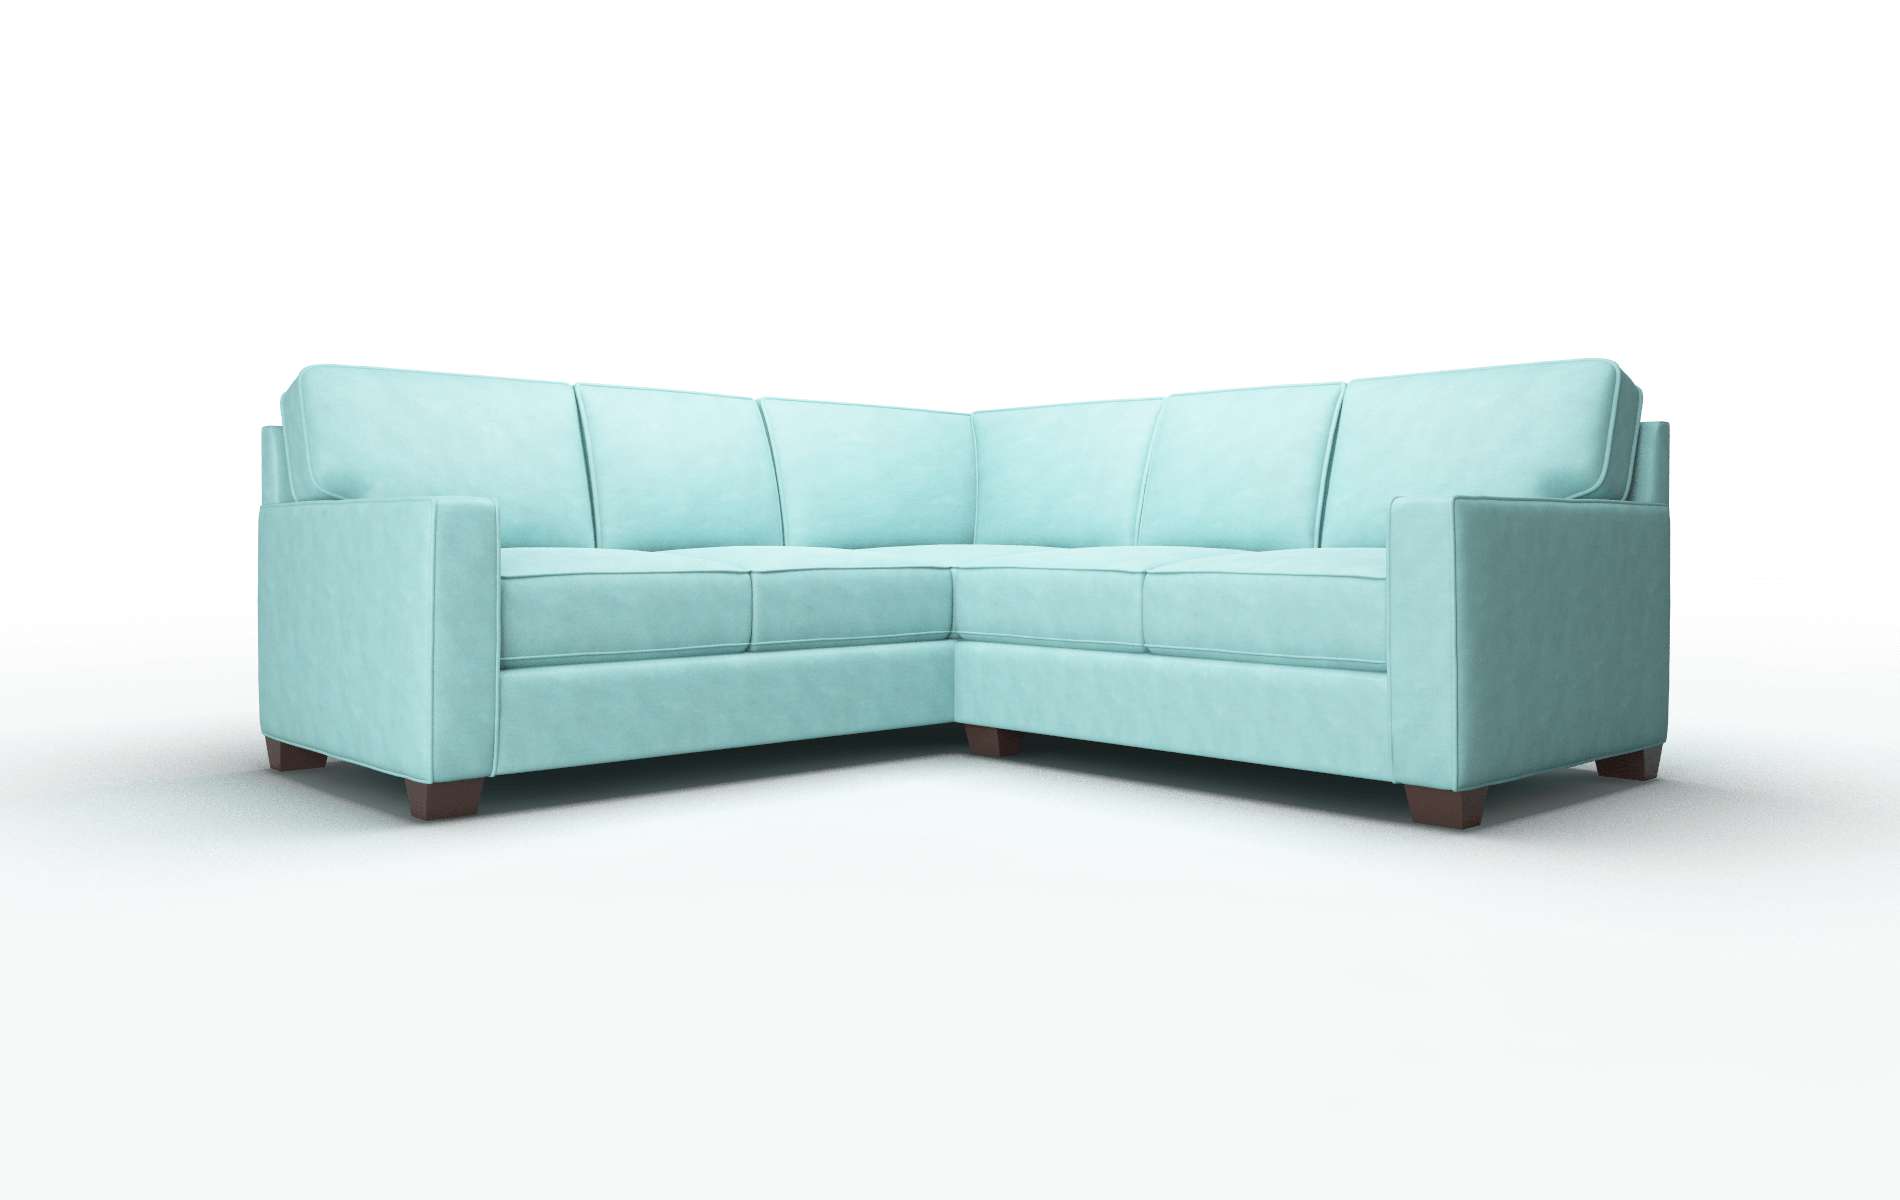 Chicago Curious Turquoise Sectional espresso legs 1